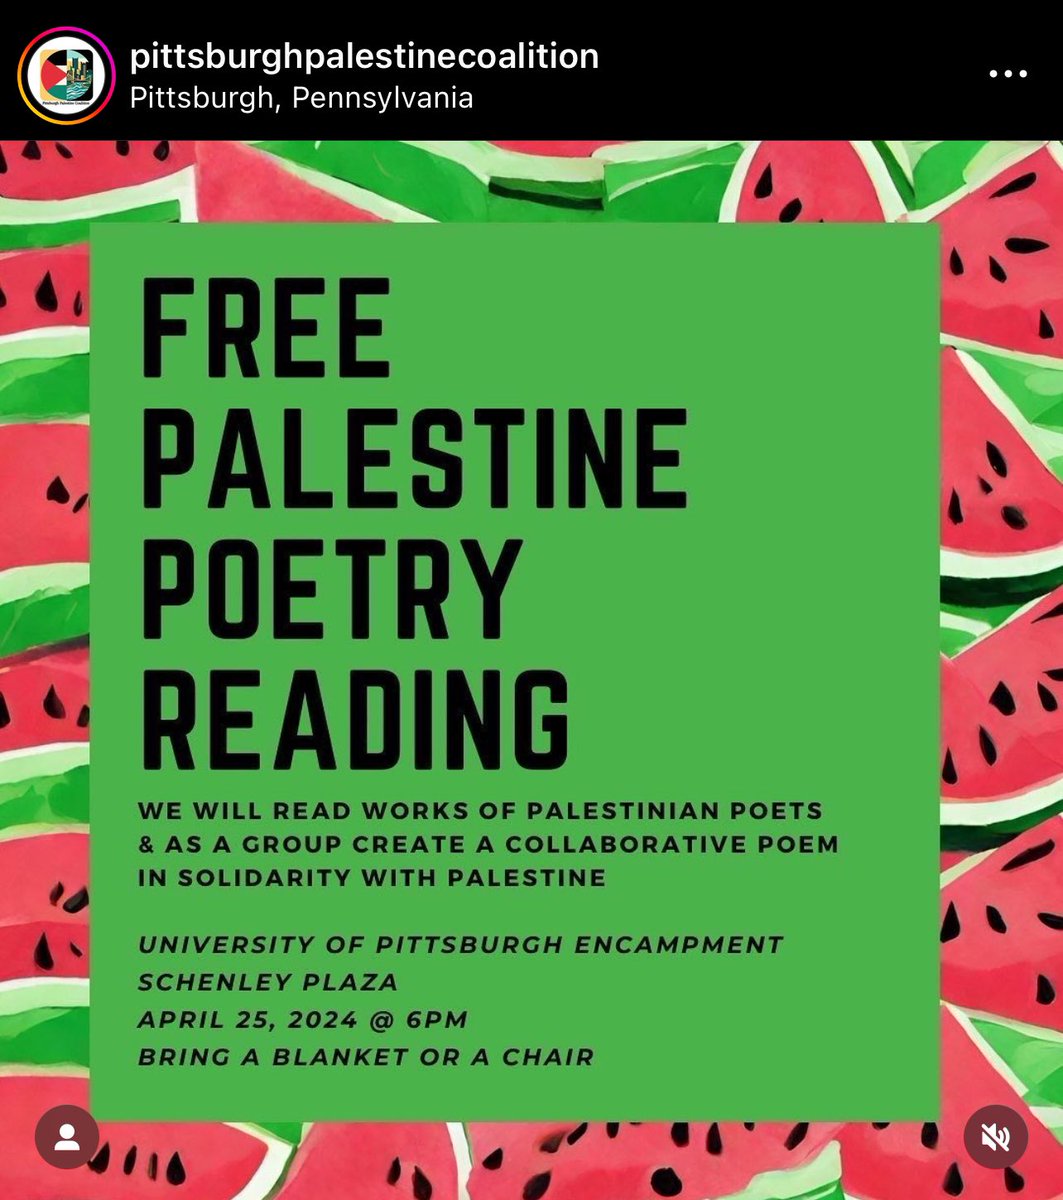 “FREE PALESTINE POETRY READING” UNIVERSITY OF PITTSBURGH ENCAMPMENT SCHENLEY PLAZA 6PM APRIL 25 2024 (TODAY) DETAILS: WE WILL READ WORKS OF PALESTINIAN POETS & AS A GROUP CREATE A COLLABORATIVE POEM IN SOLIDARITY WITH PALESTINE. BRING A BLANKET OR A CHAIR